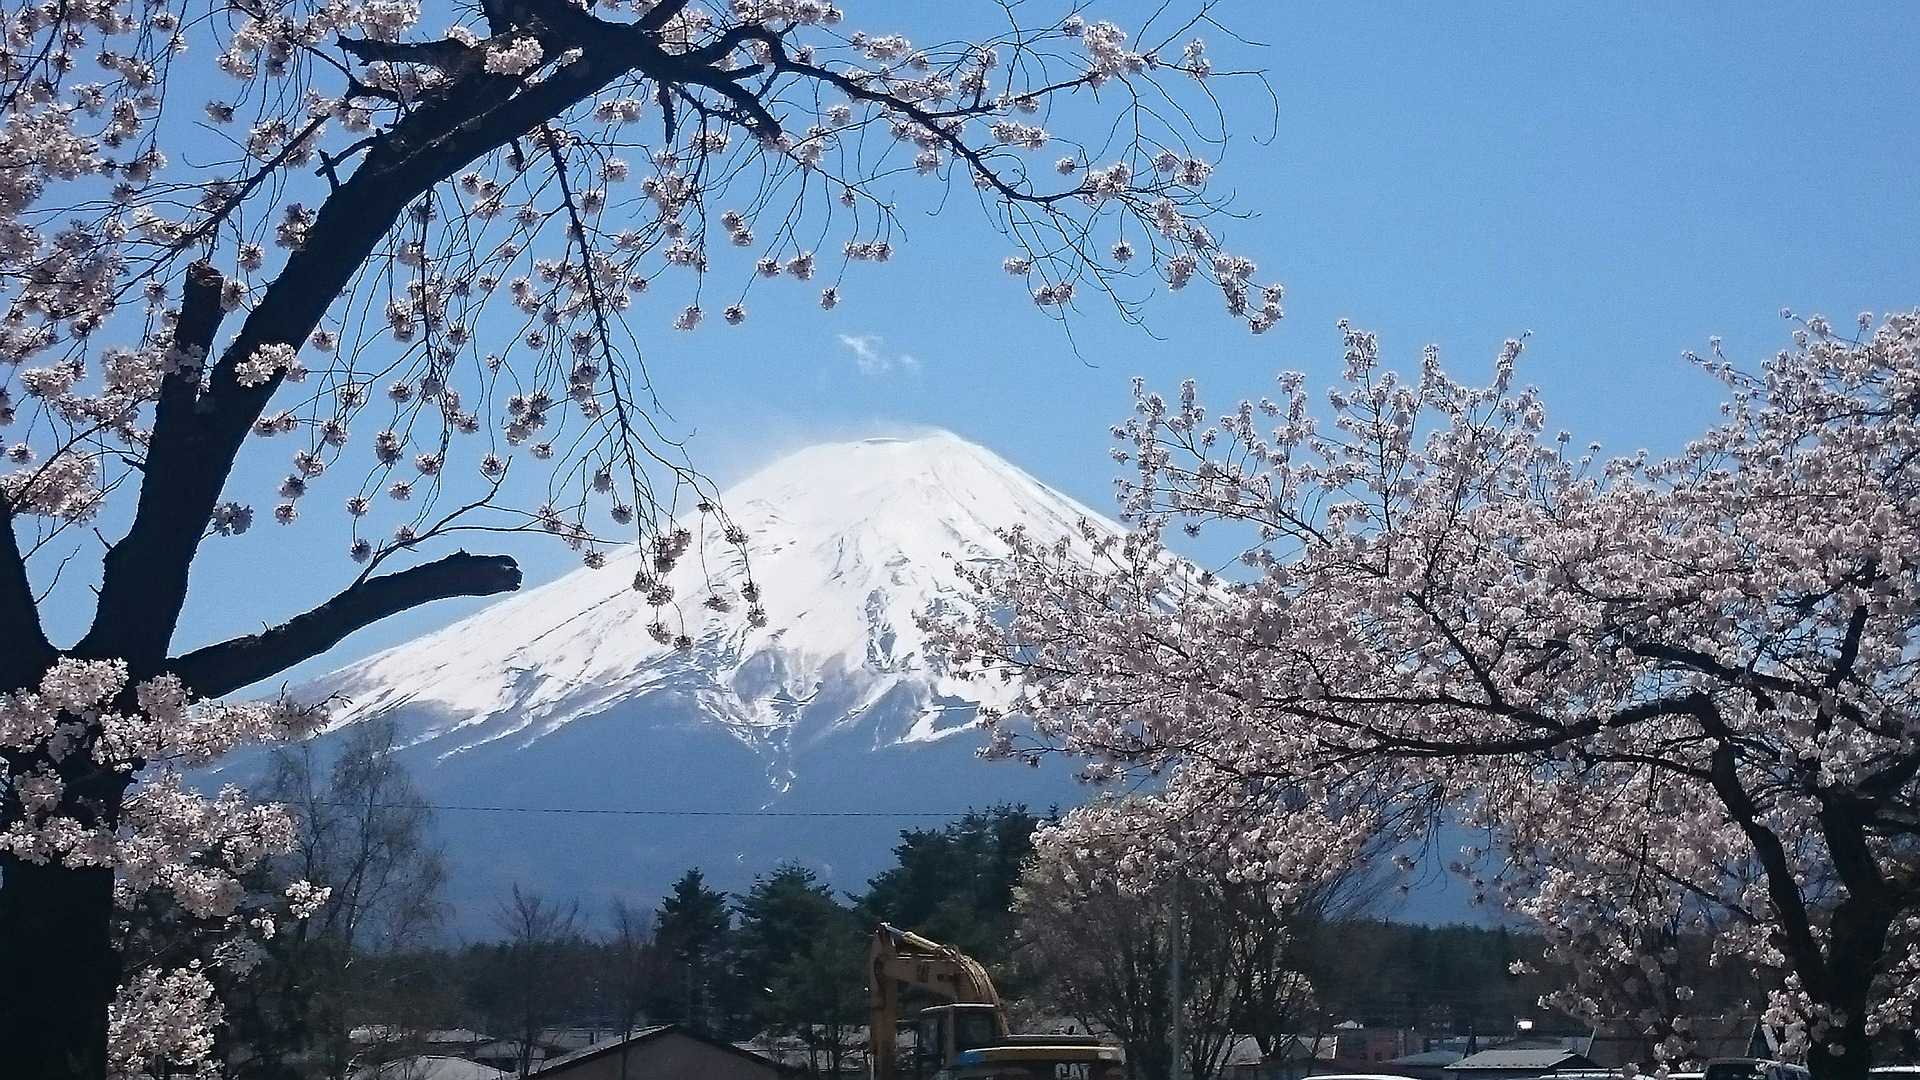 Mount Fuji Climb: Facts & Information. Routes, Climate, Difficulty, Equipment, Preparation, Cost